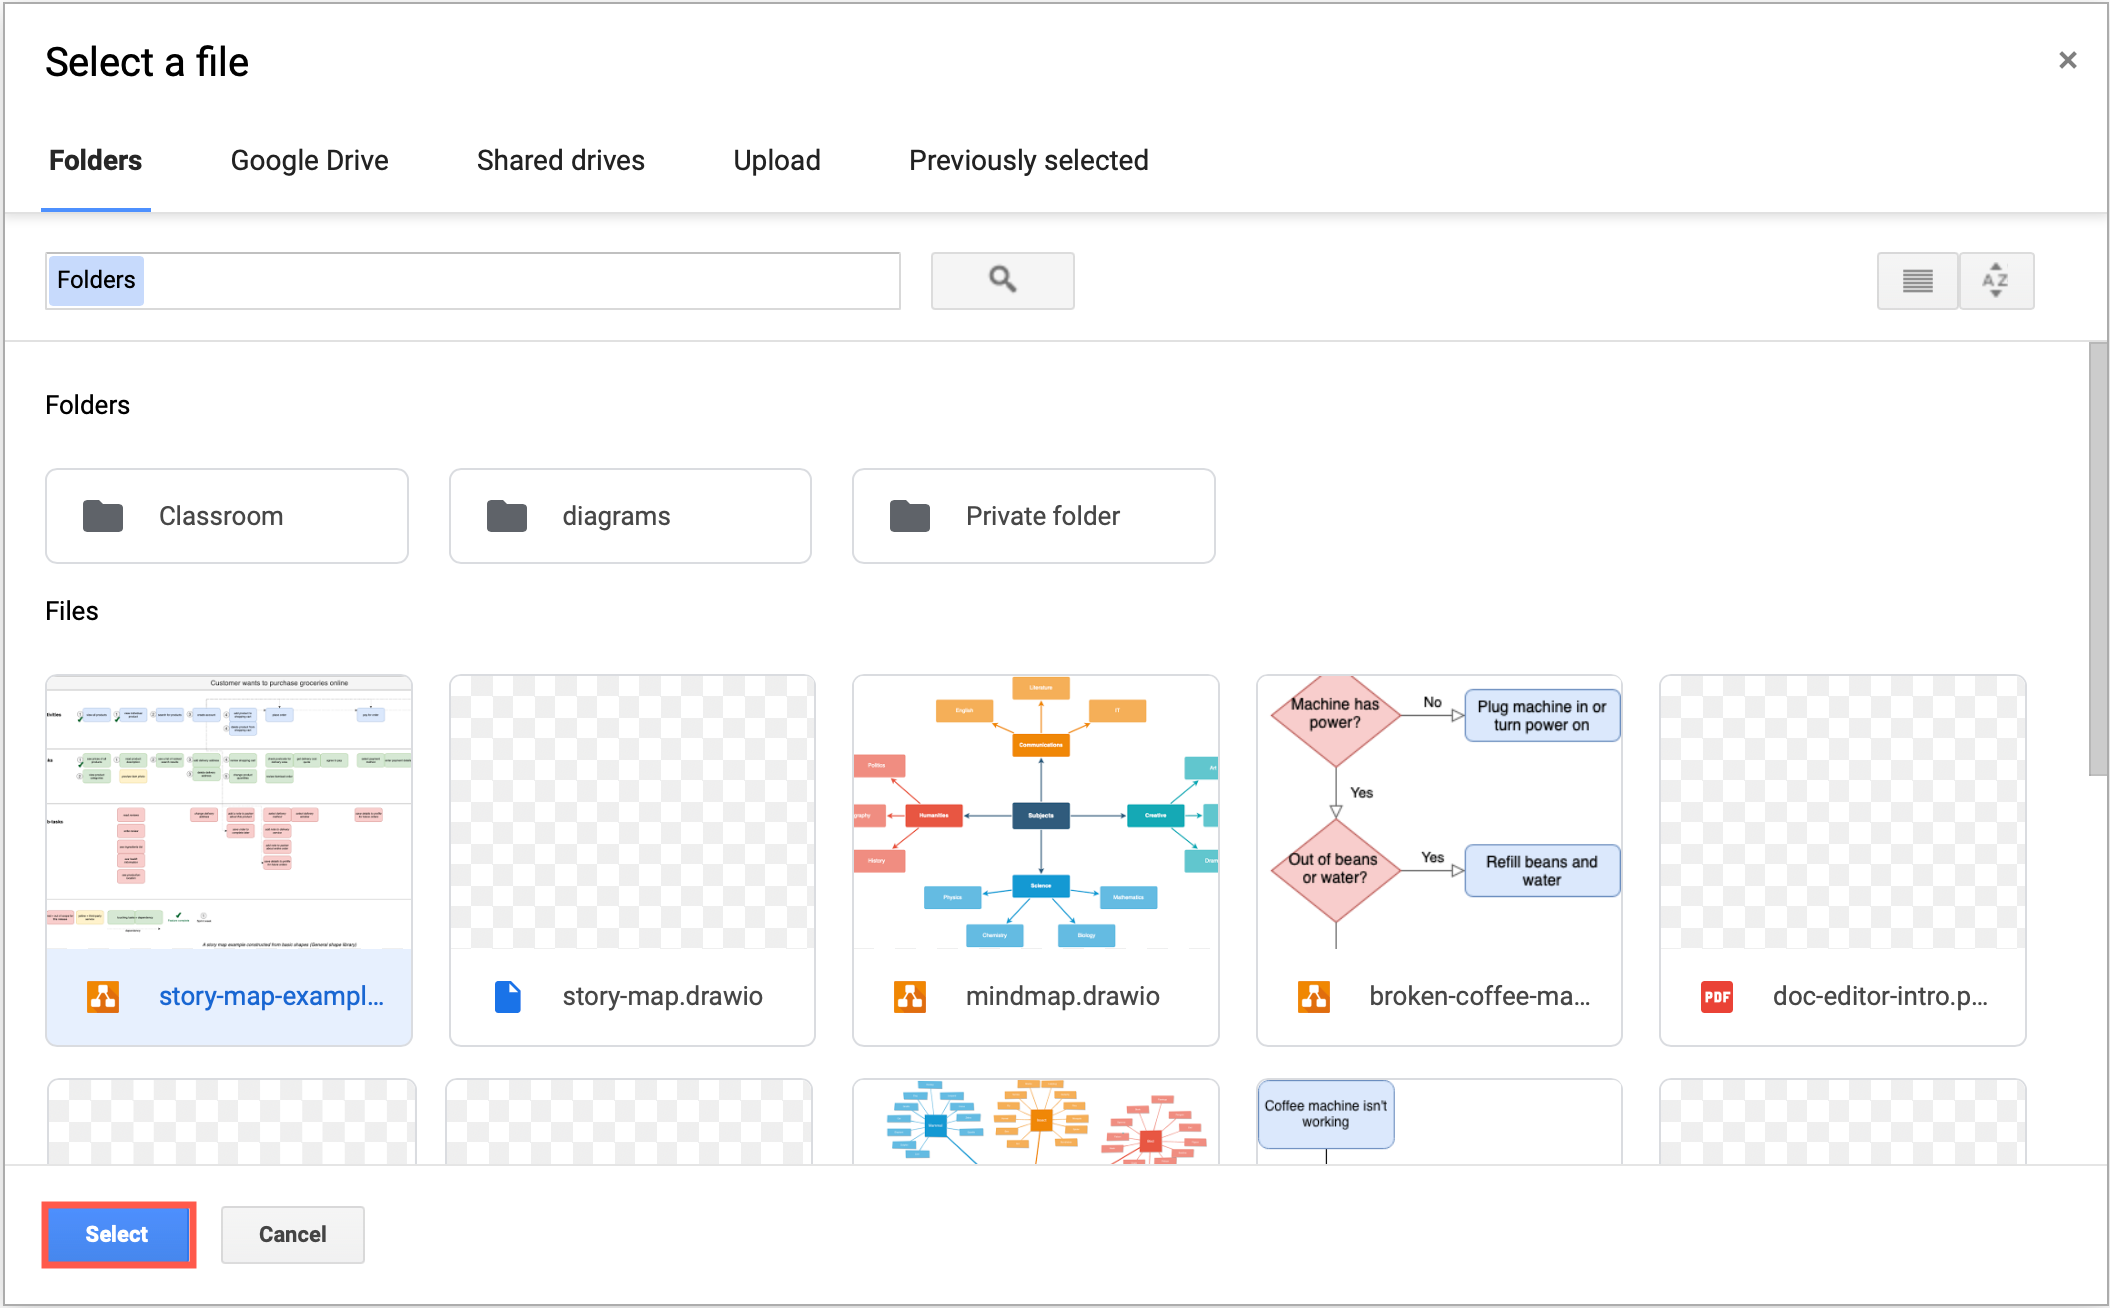 Navigate to the diagram file in Google Drive and click Select to see a preview